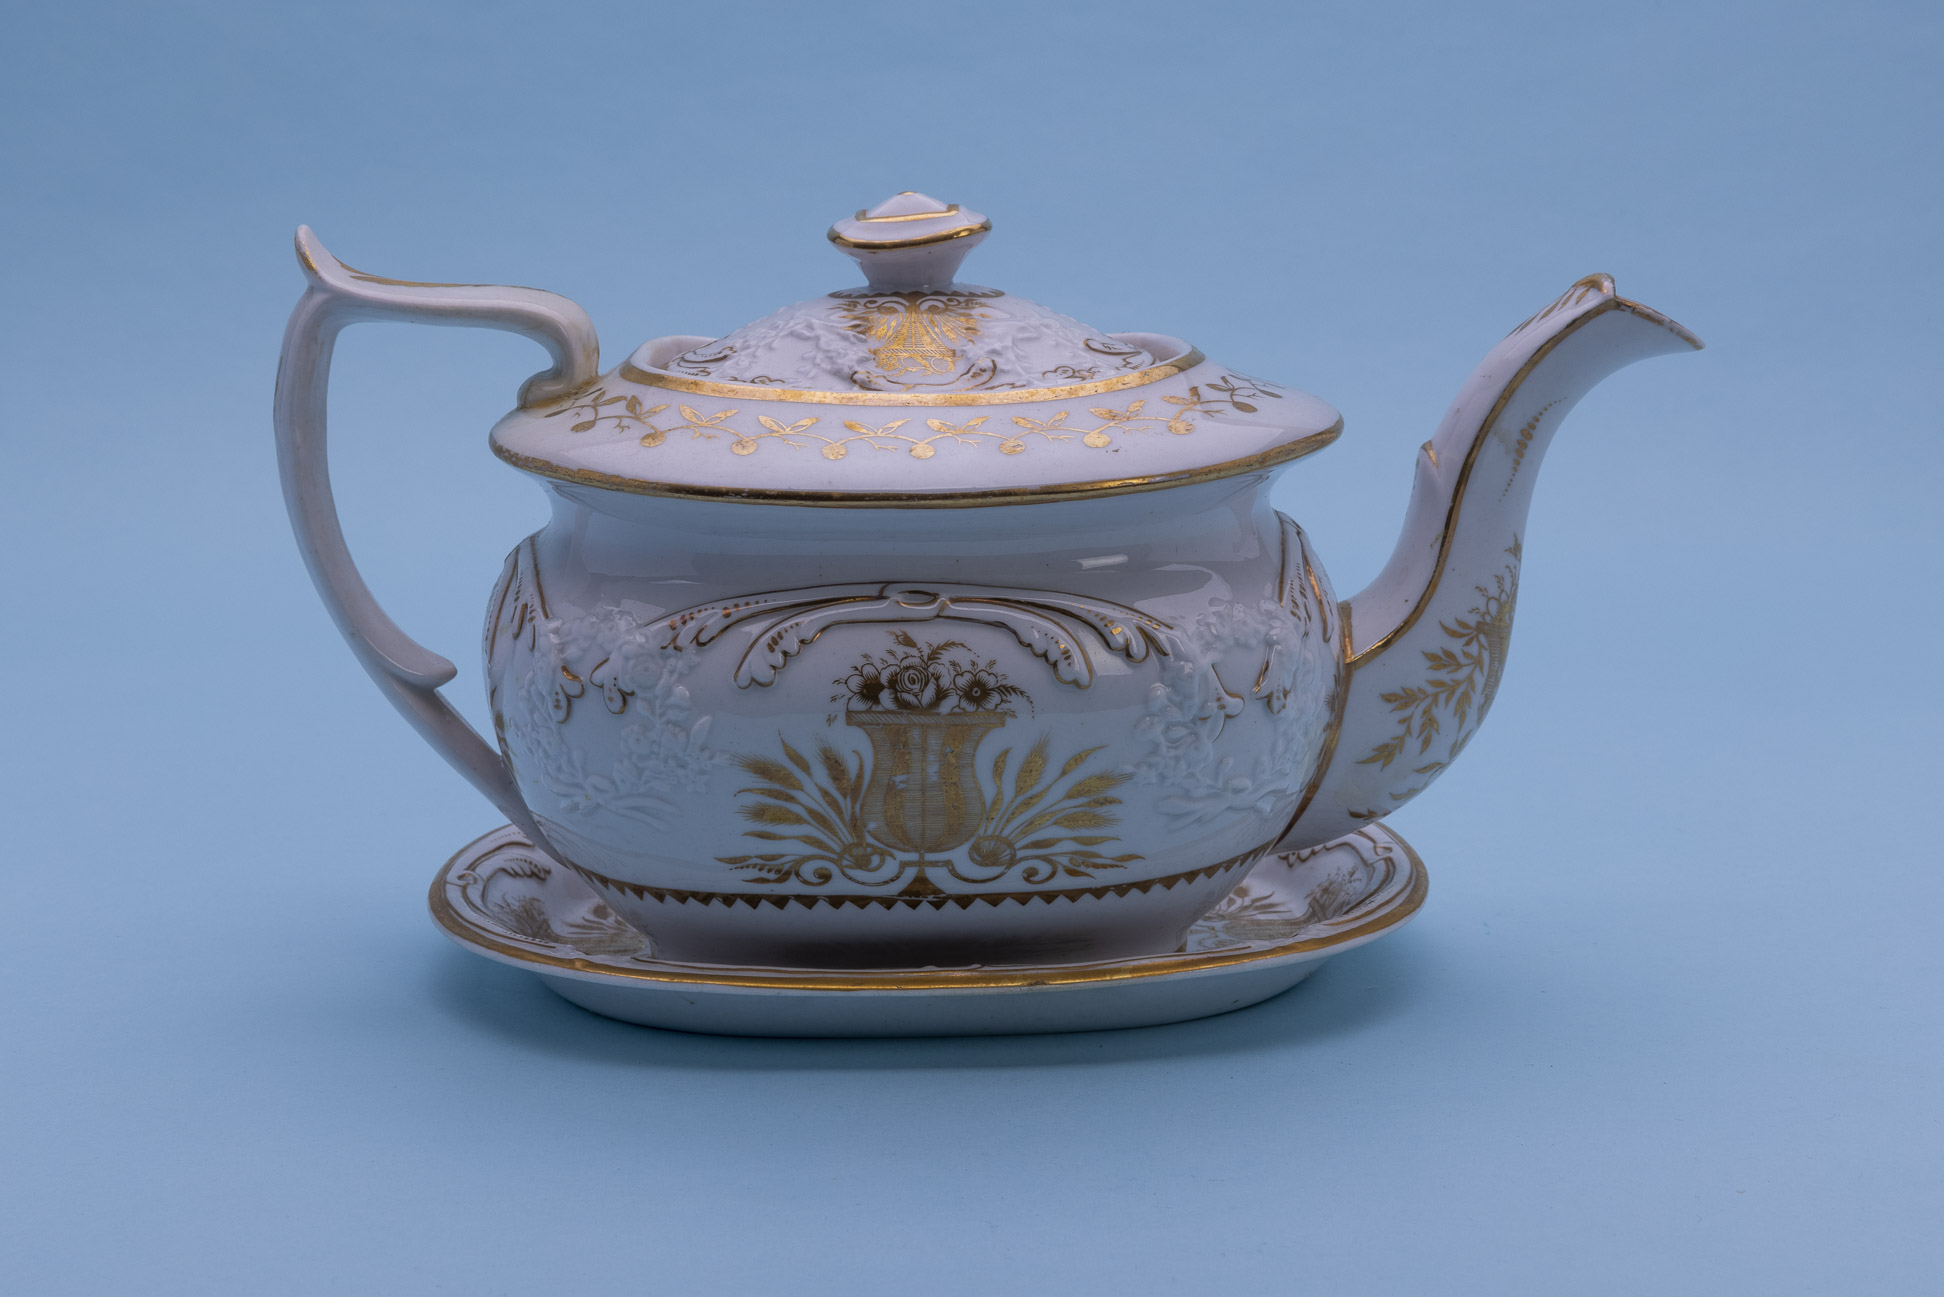 A PORCELAIN TEAPOT AND STAND